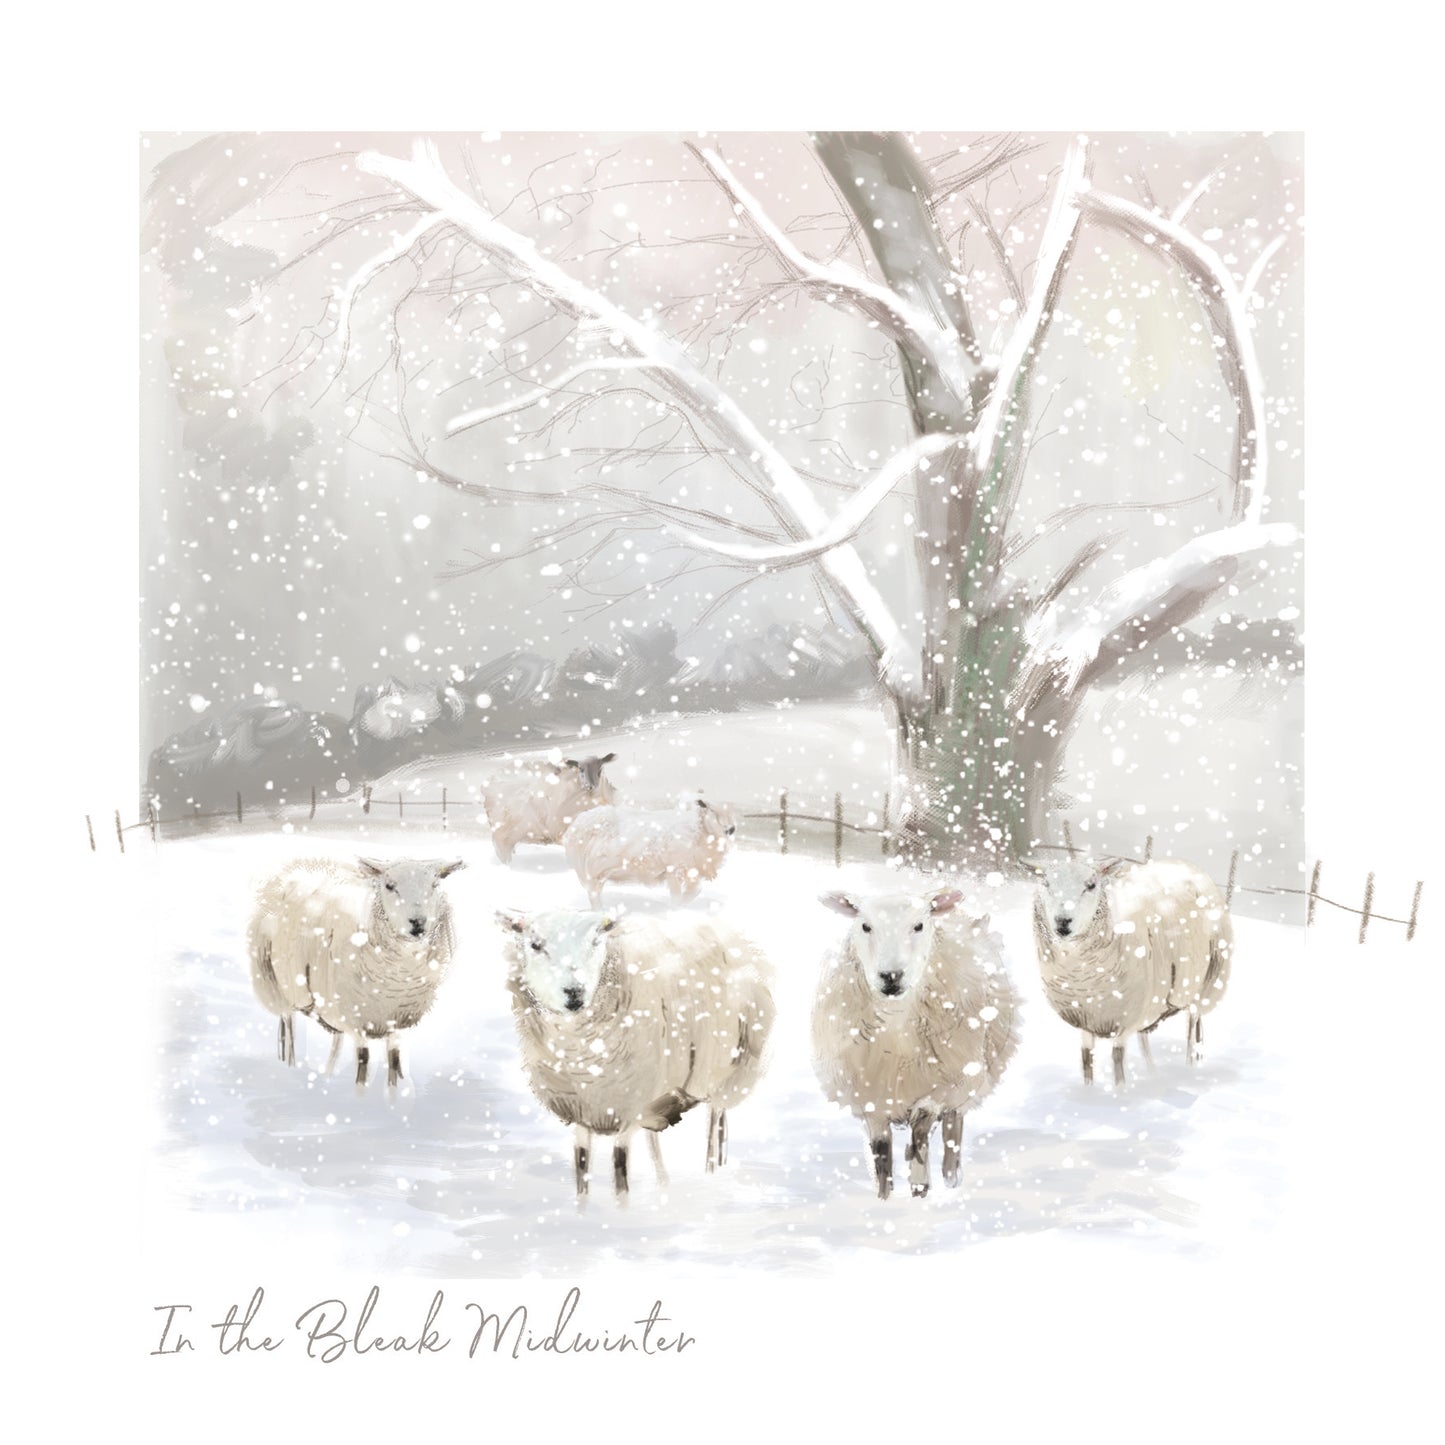 Box of 16 Deer & Sheep In The Snowy Clearing Art Christmas Cards